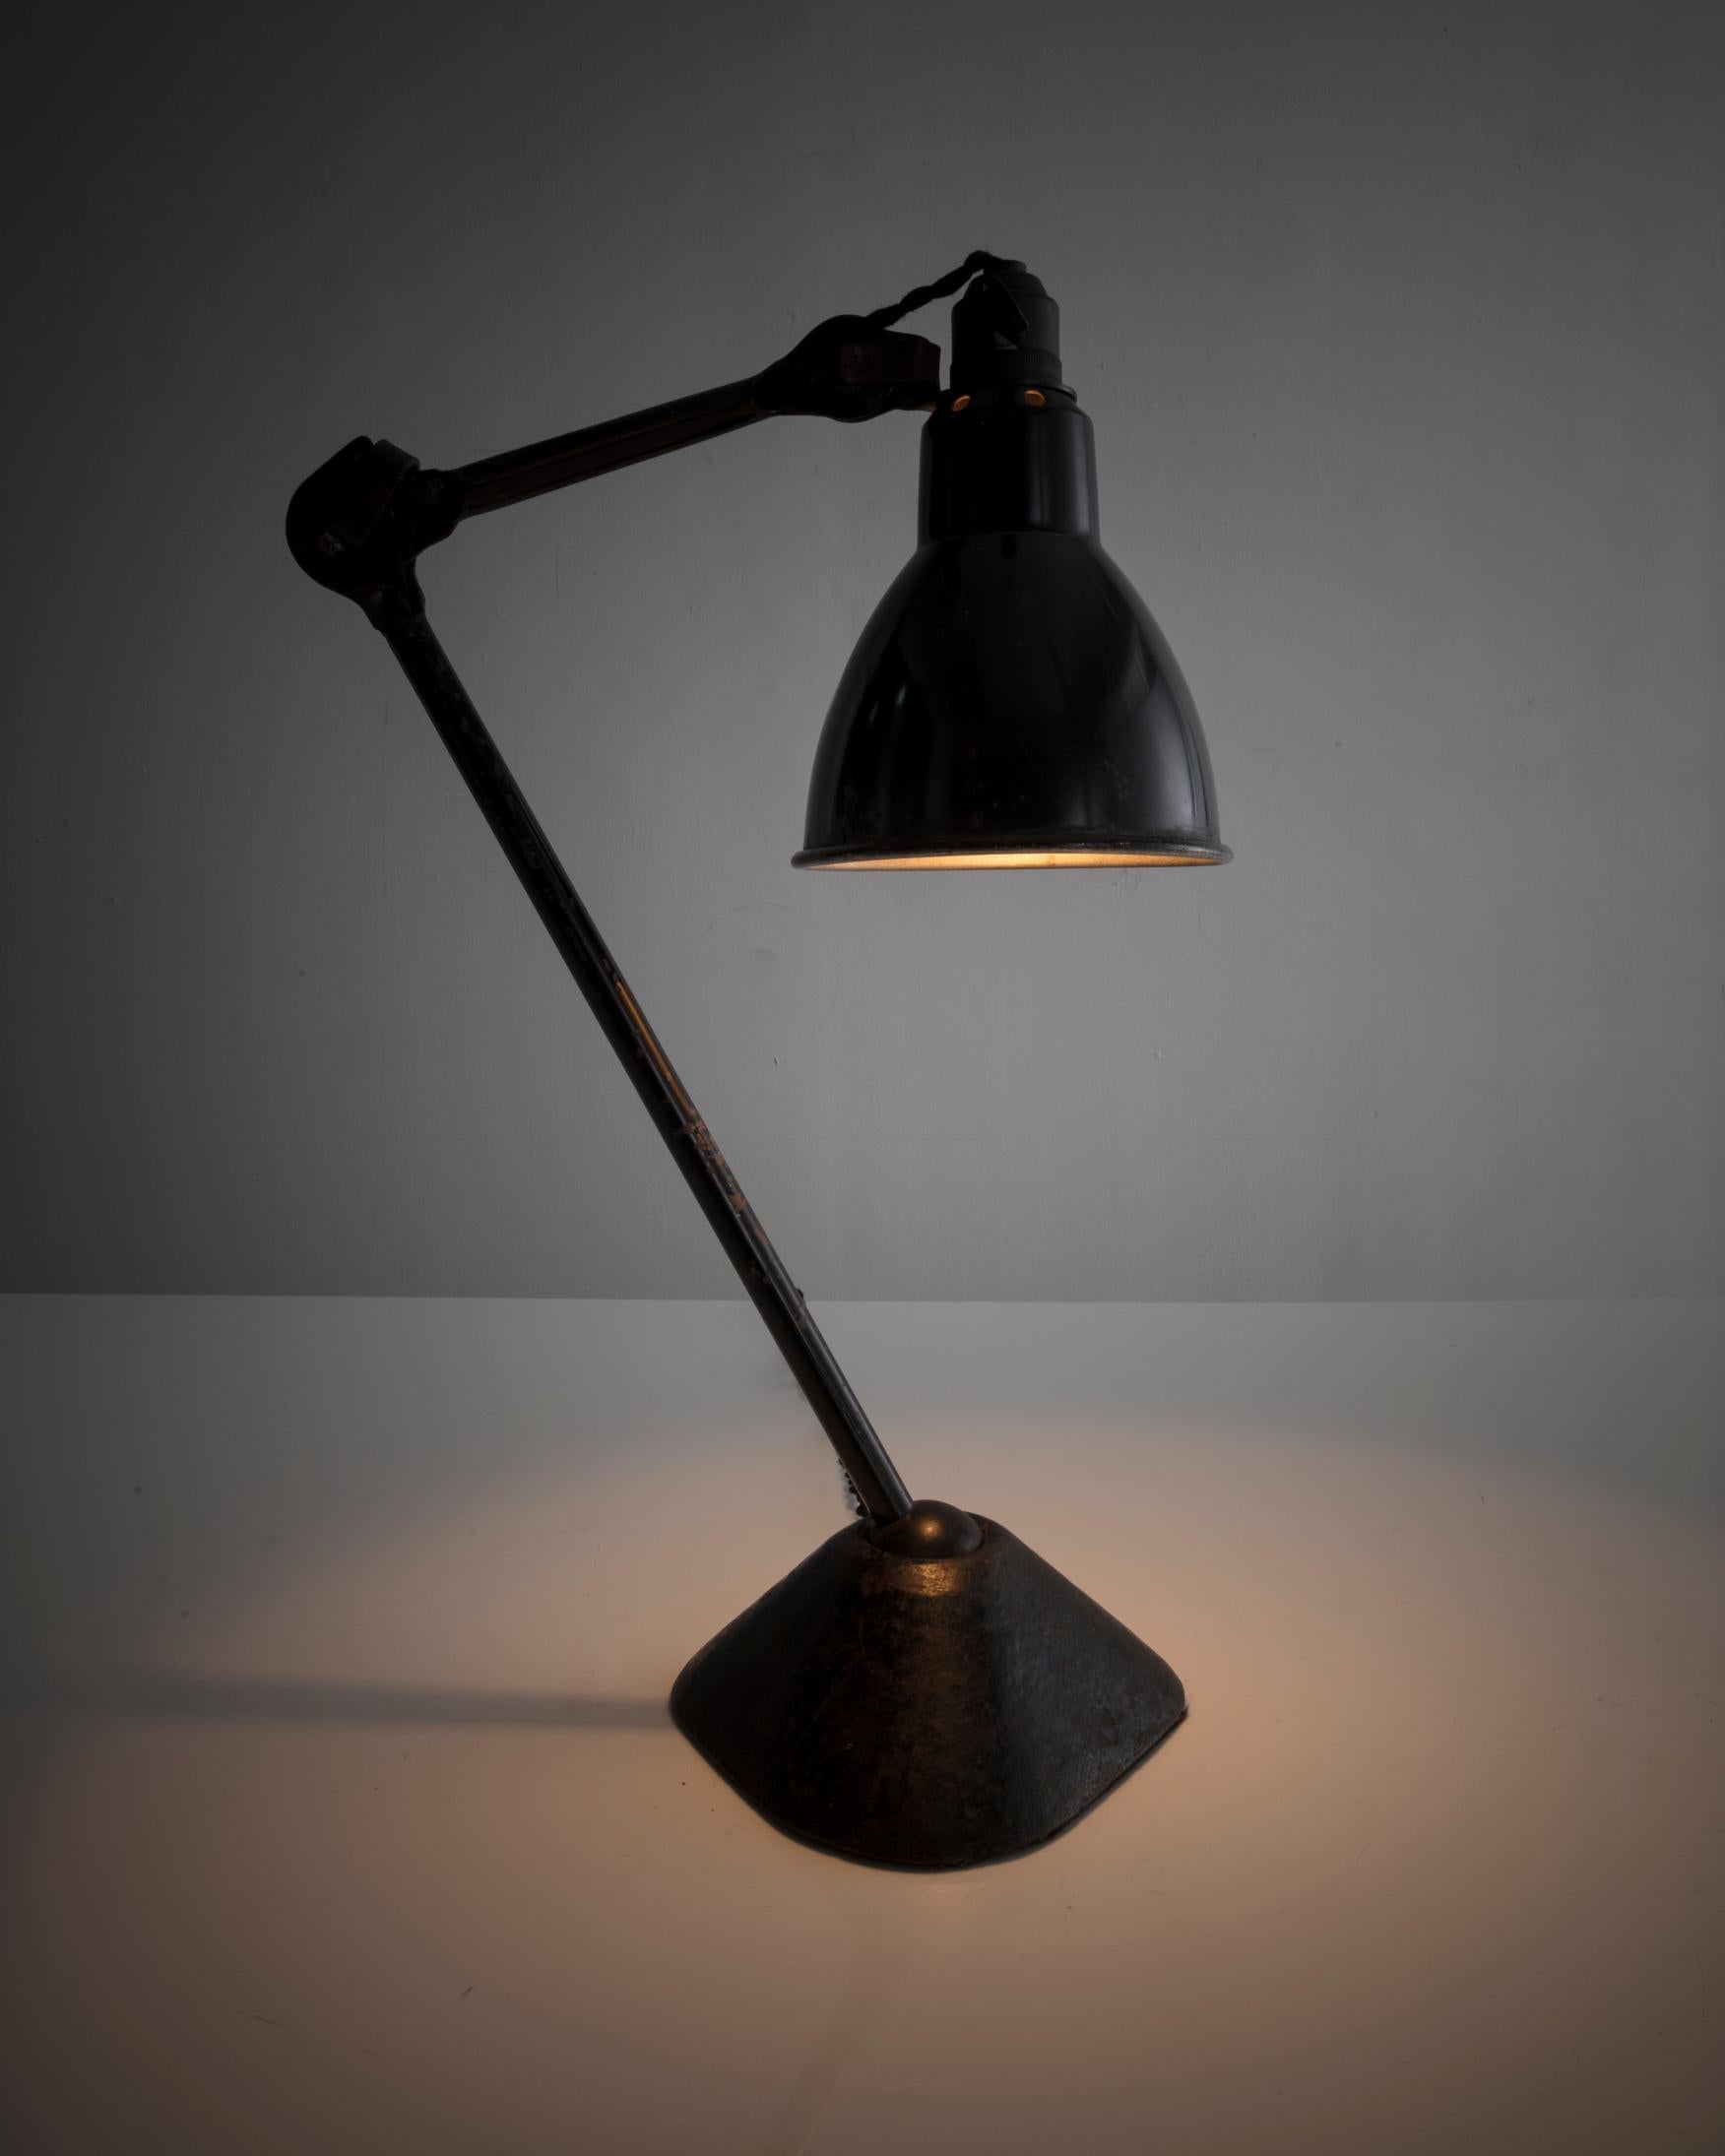 Table lamp in black metal with triangular base. Designed by Bernard-Albin Gras for Les Ateliers Gras, France, 1920s (height is variable).
 